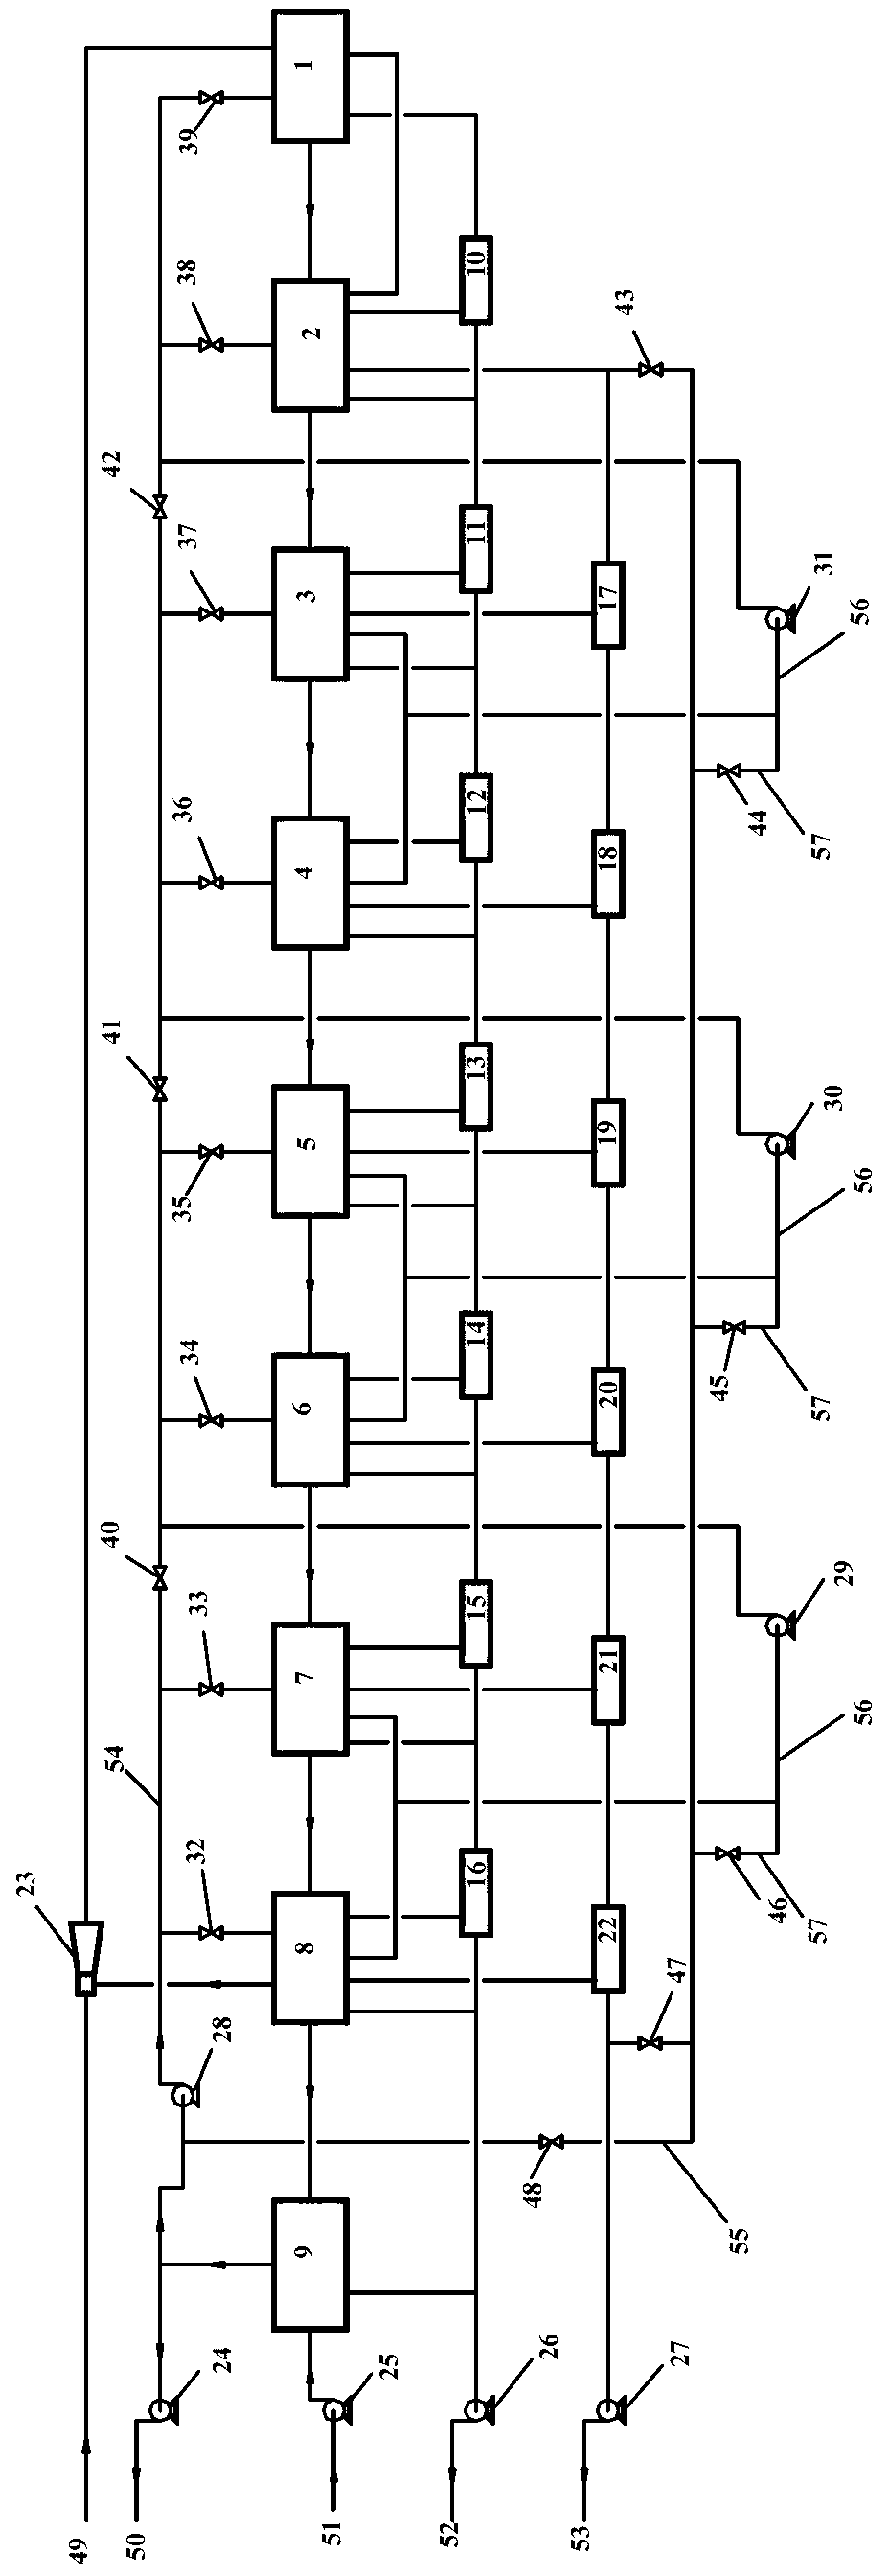 Low-temperature multi-effect distilled seawater desalination system with variable effect groups